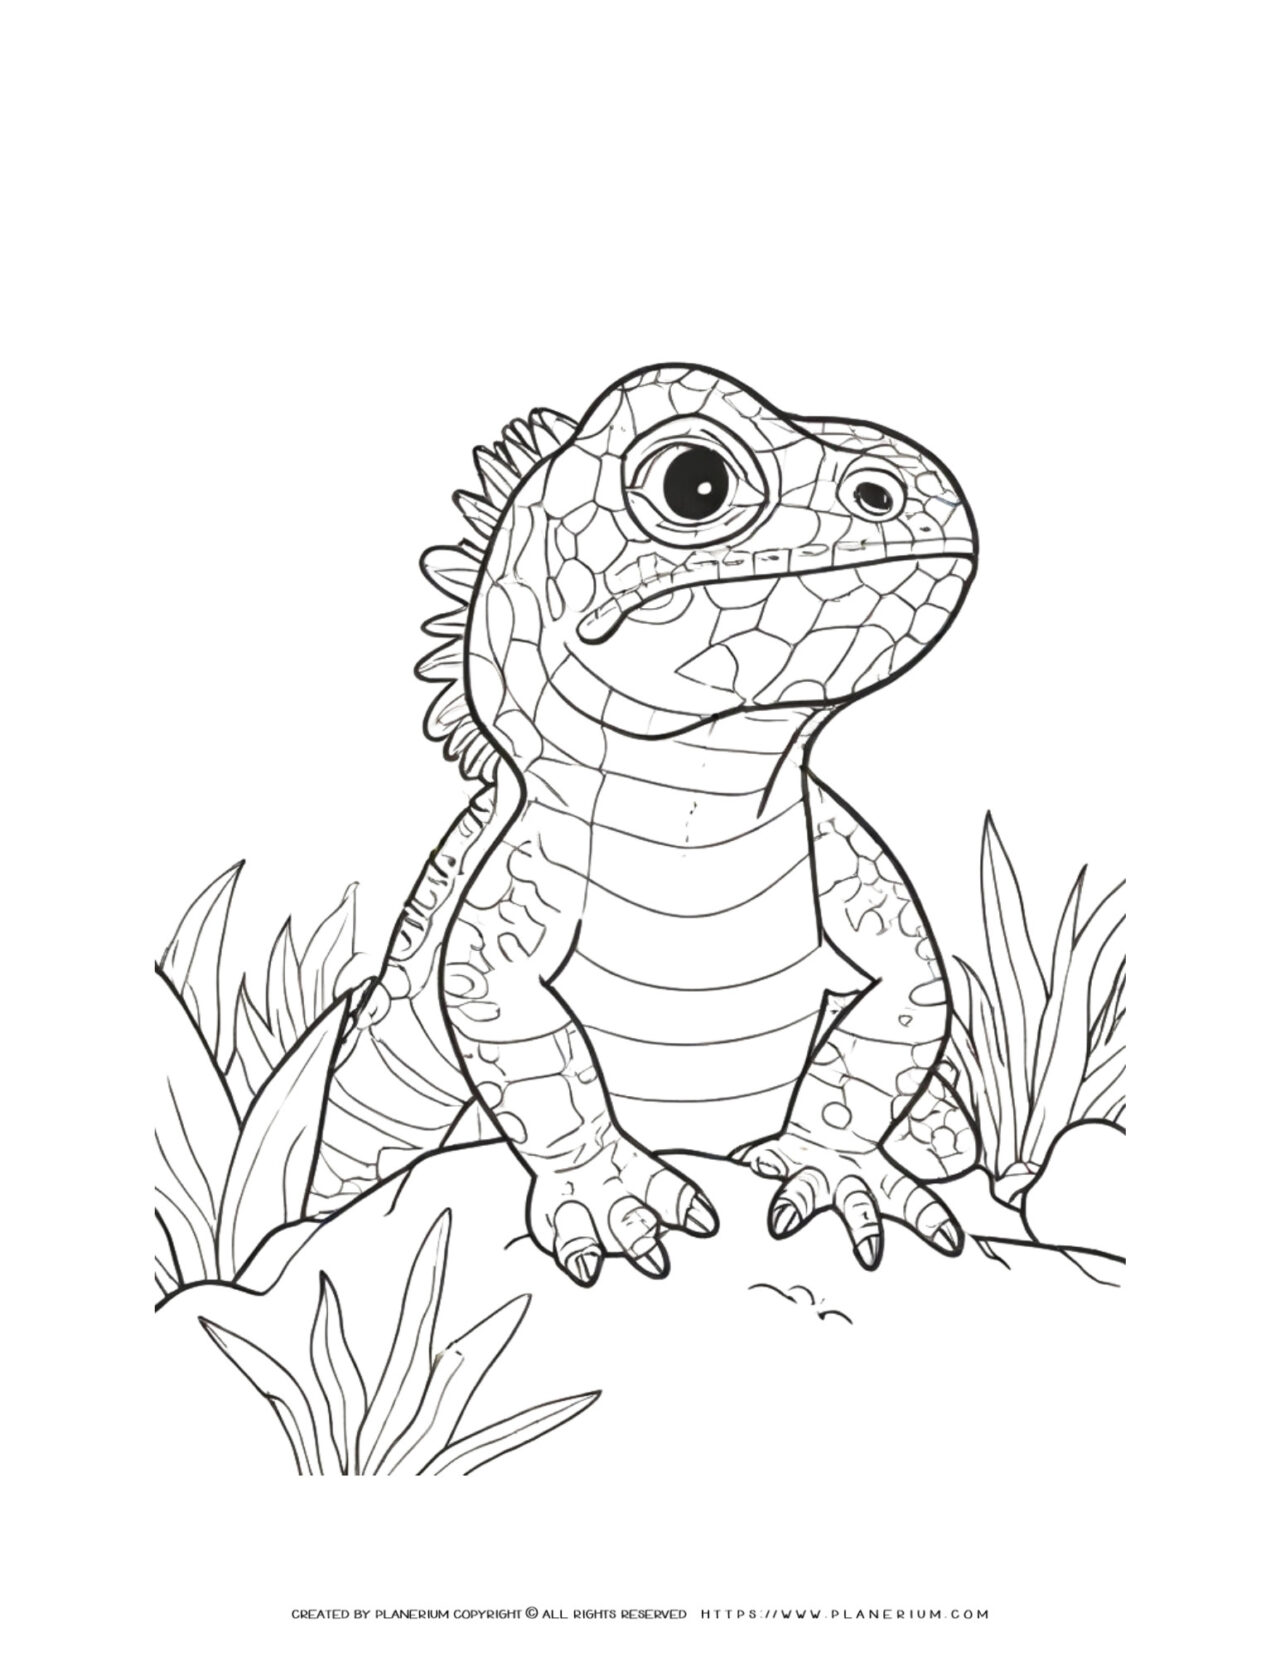 Sneaky-Lizard-Emerges-from-Mossy-Rock-Detailed-Coloring-for-Reptile-Fans